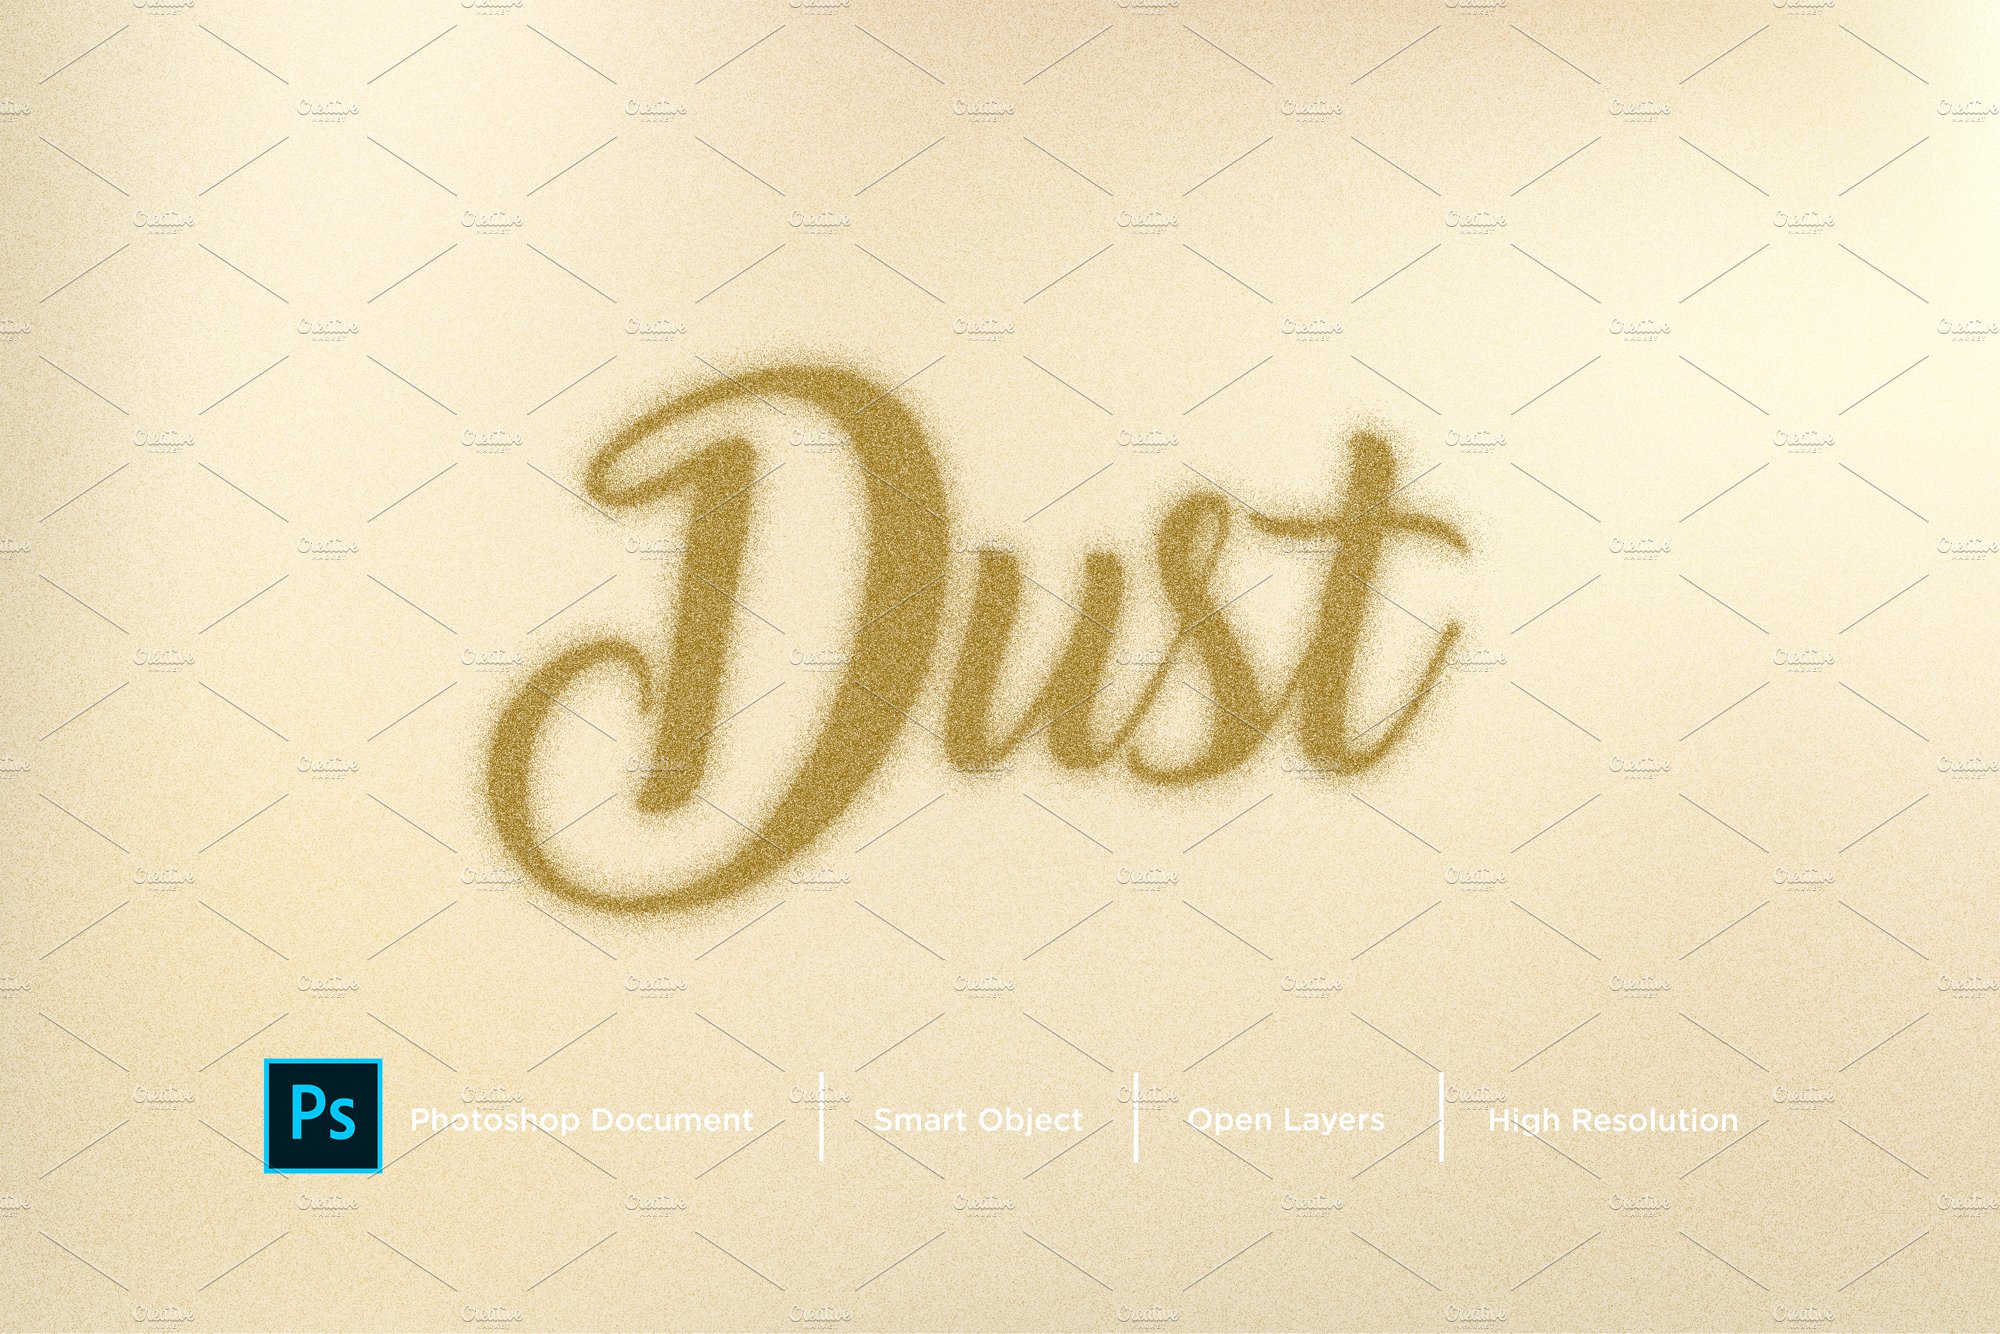 Dust Text Effect & Layer Stylecover image.